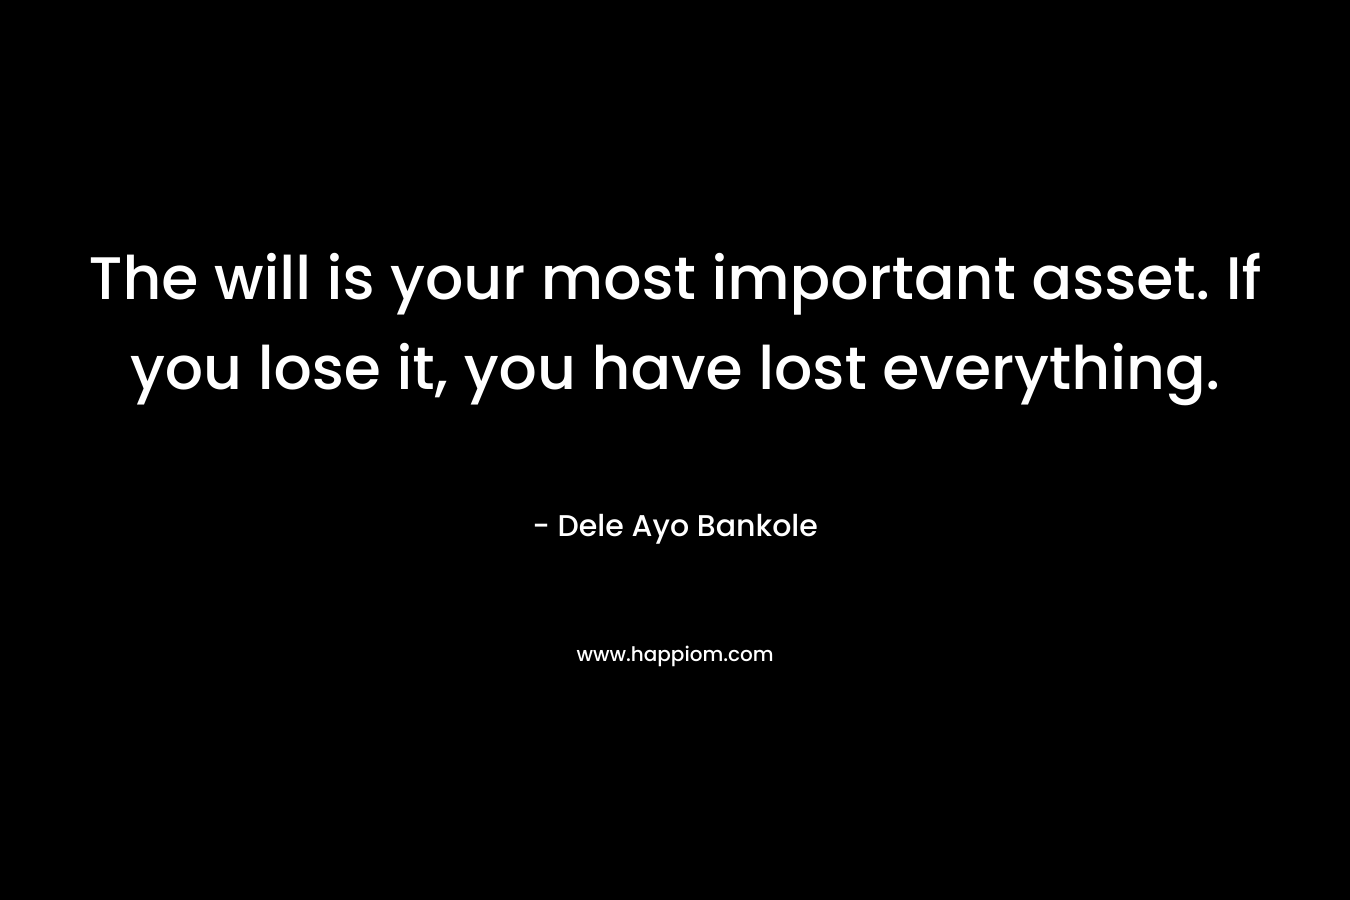 The will is your most important asset. If you lose it, you have lost everything.